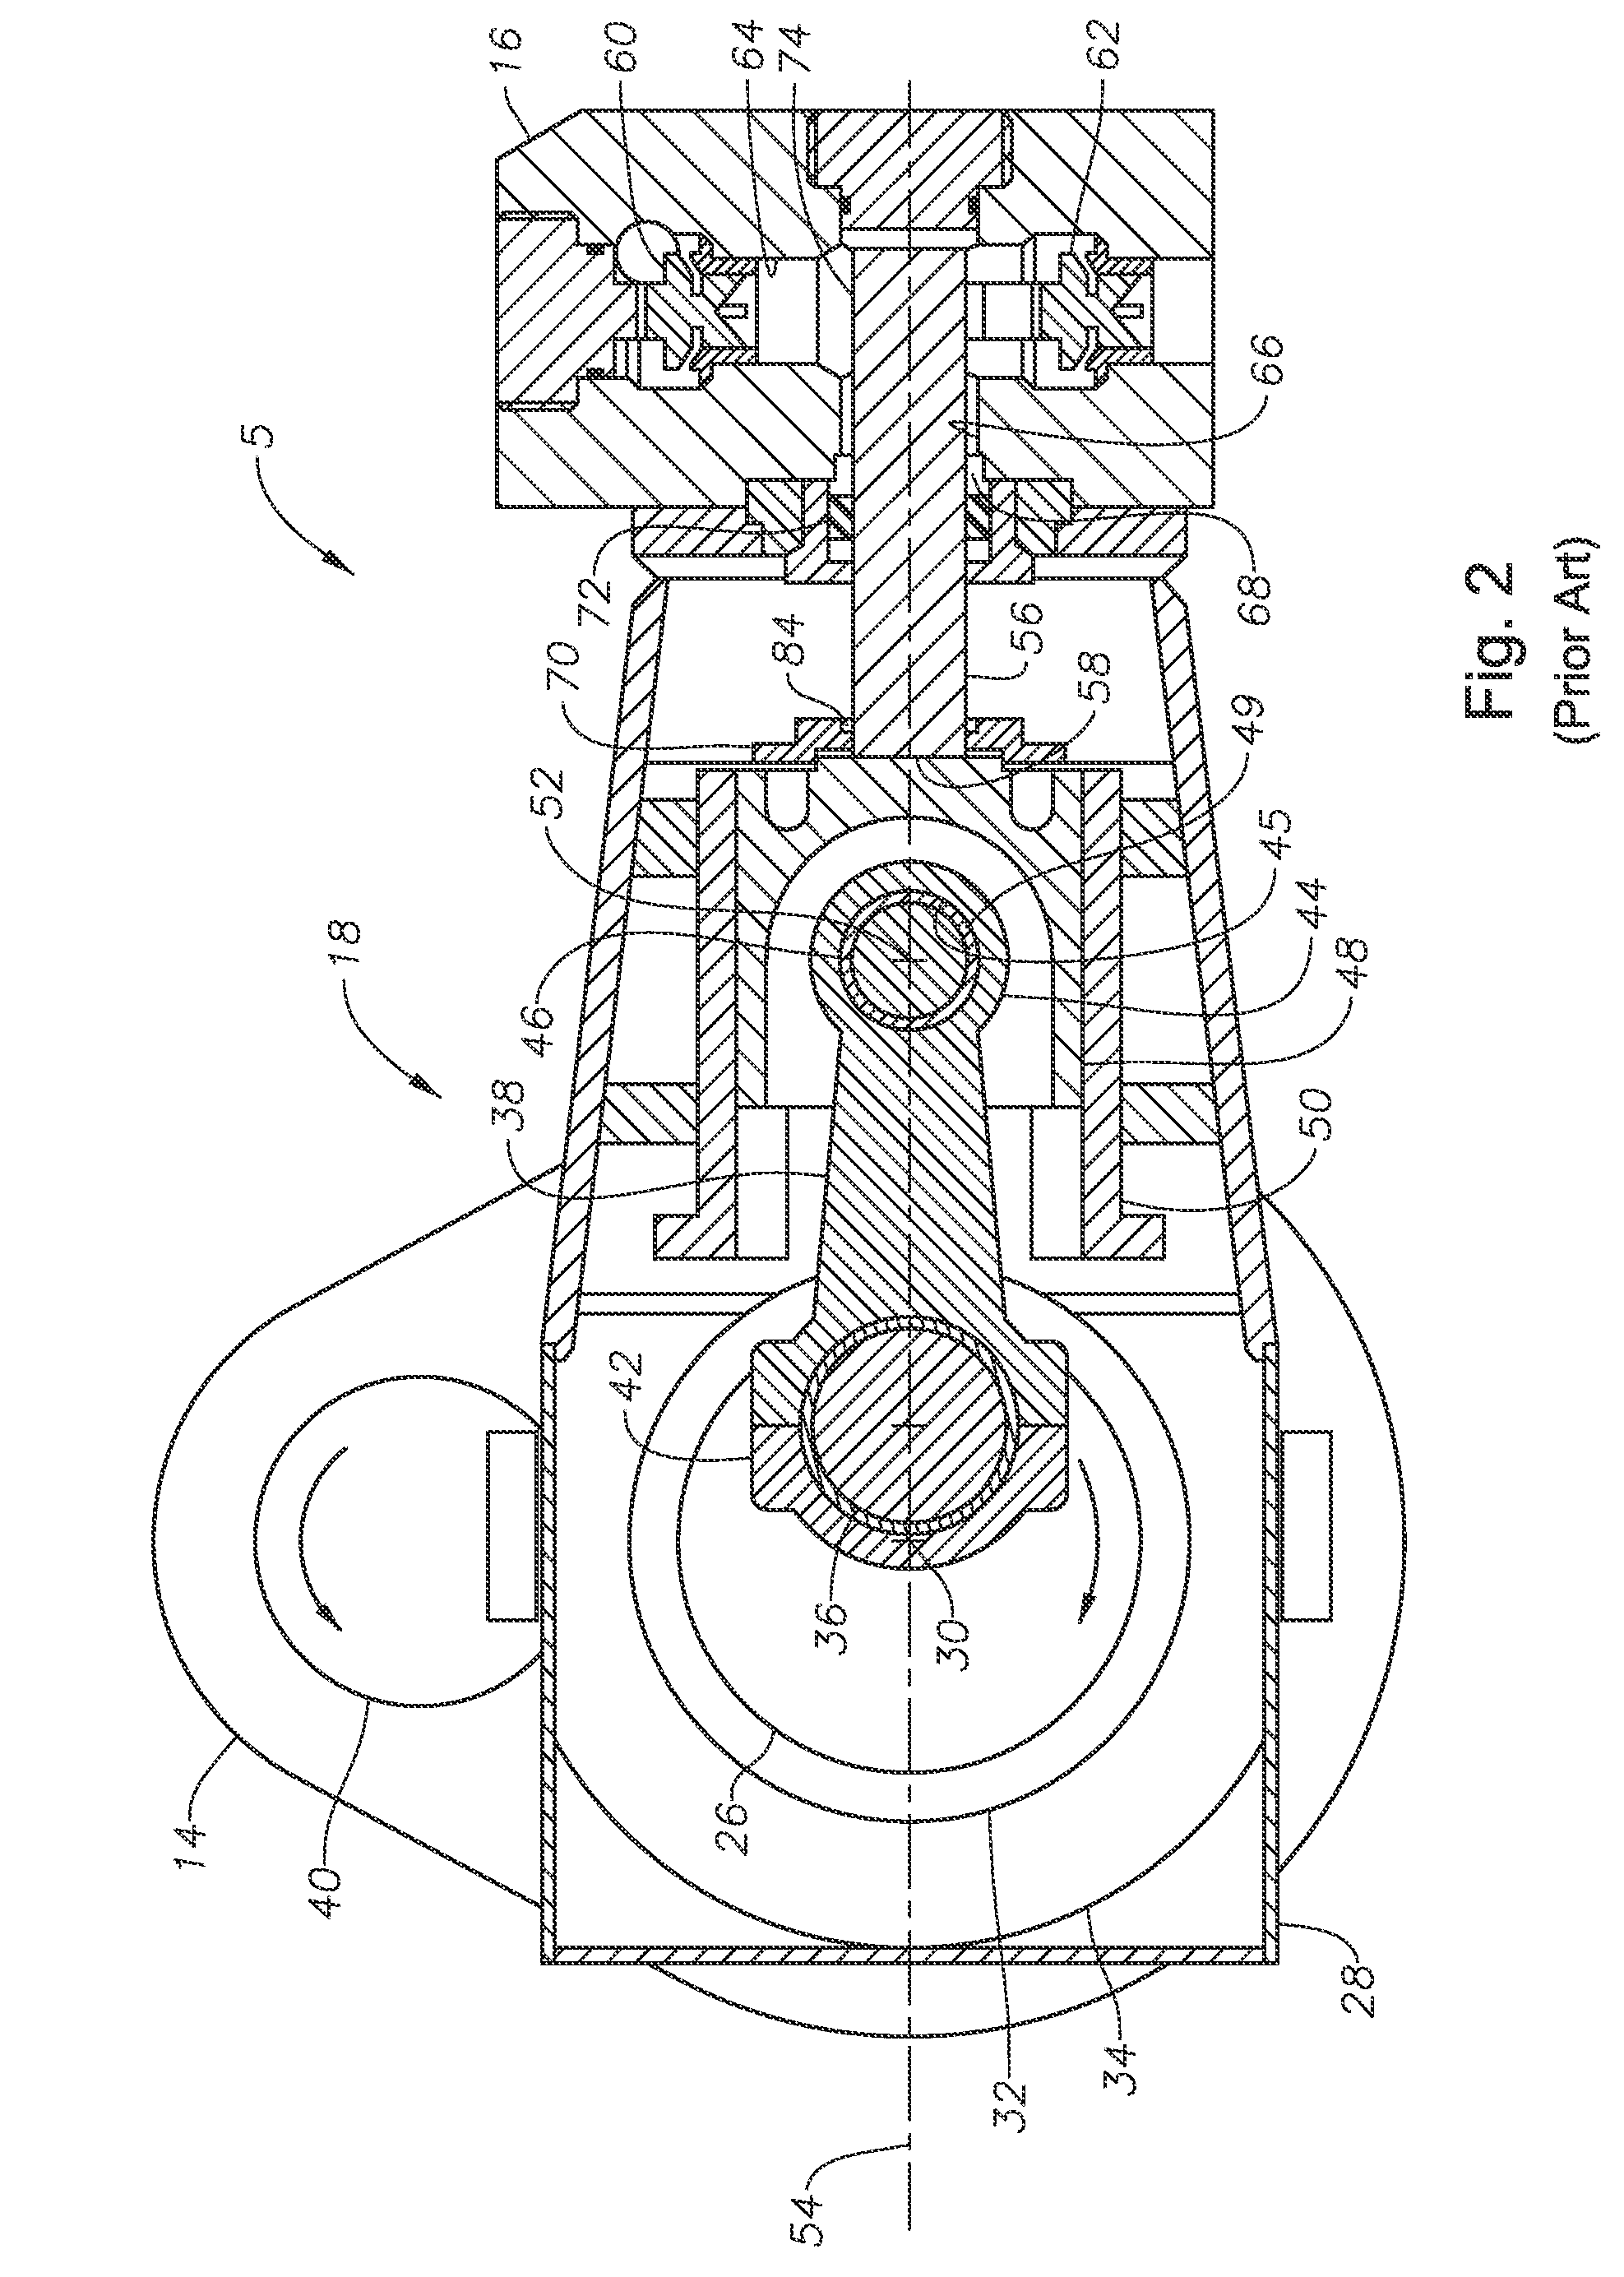 Short Length Pump Having Brine Resistant Seal and Rotating Wrist Pin and Related Methods